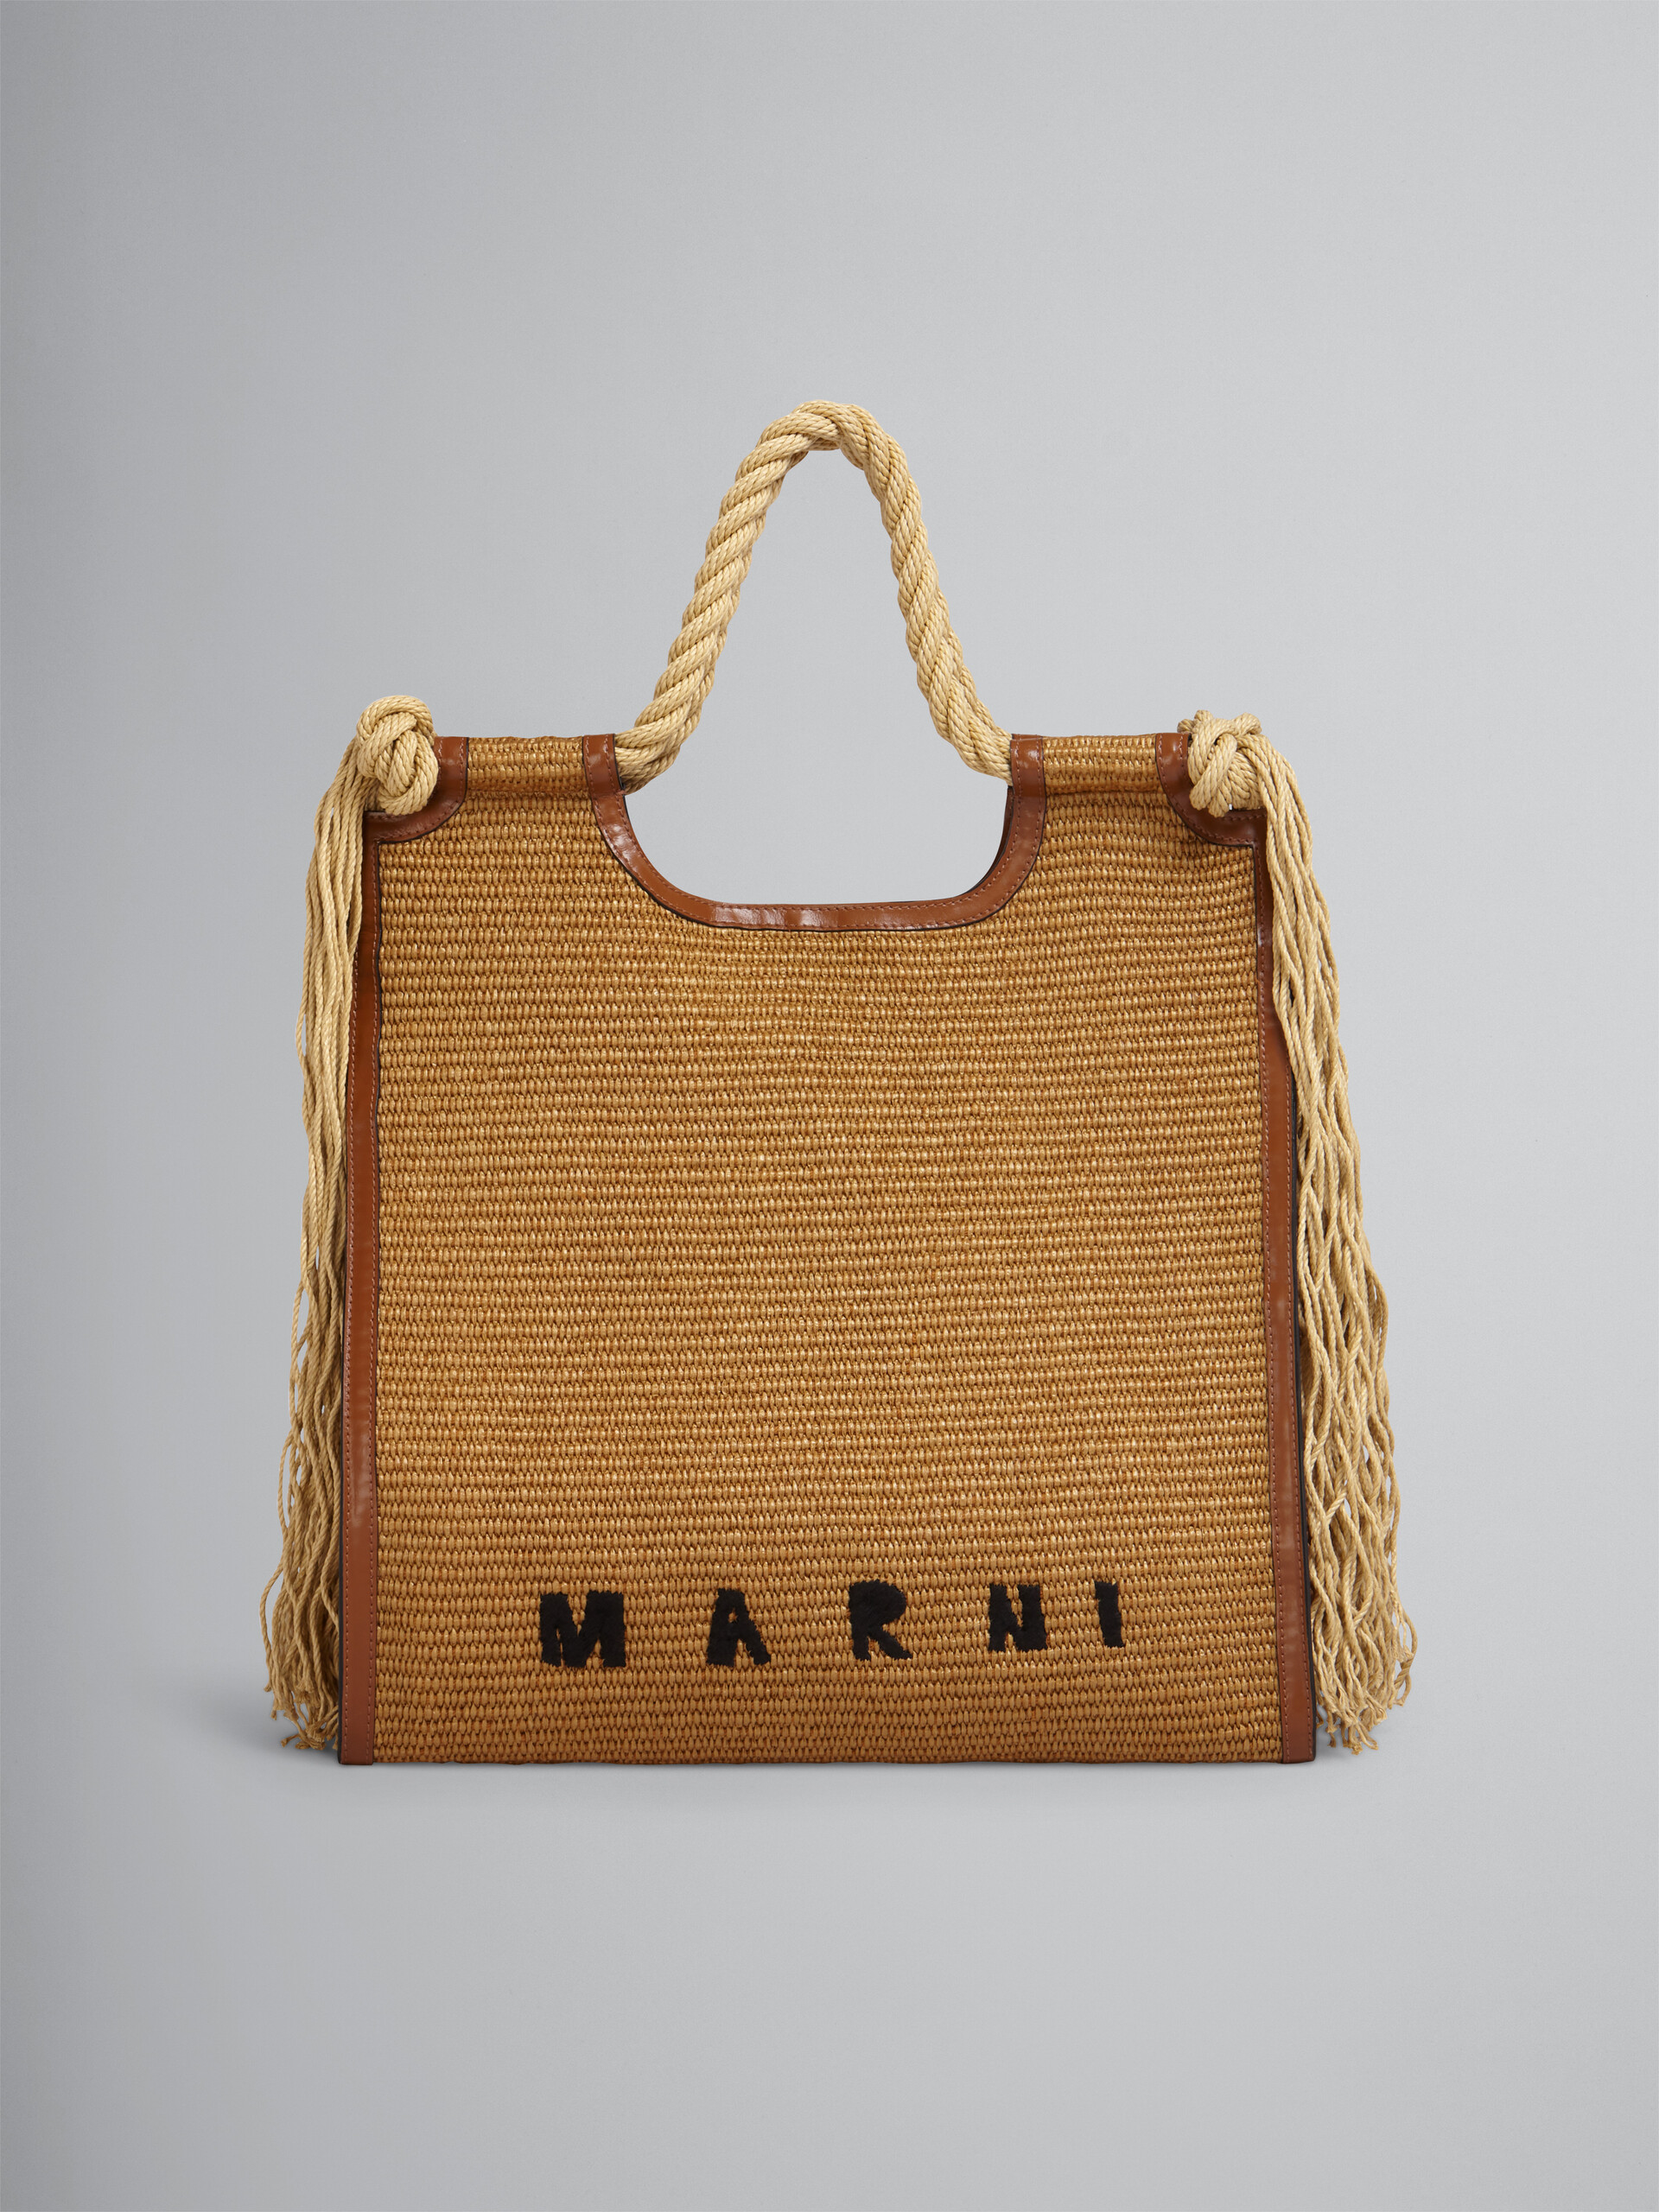 MARCEL summer bag in raffia-effect fabric, with brown leather and rope handles - Handbags - Image 1